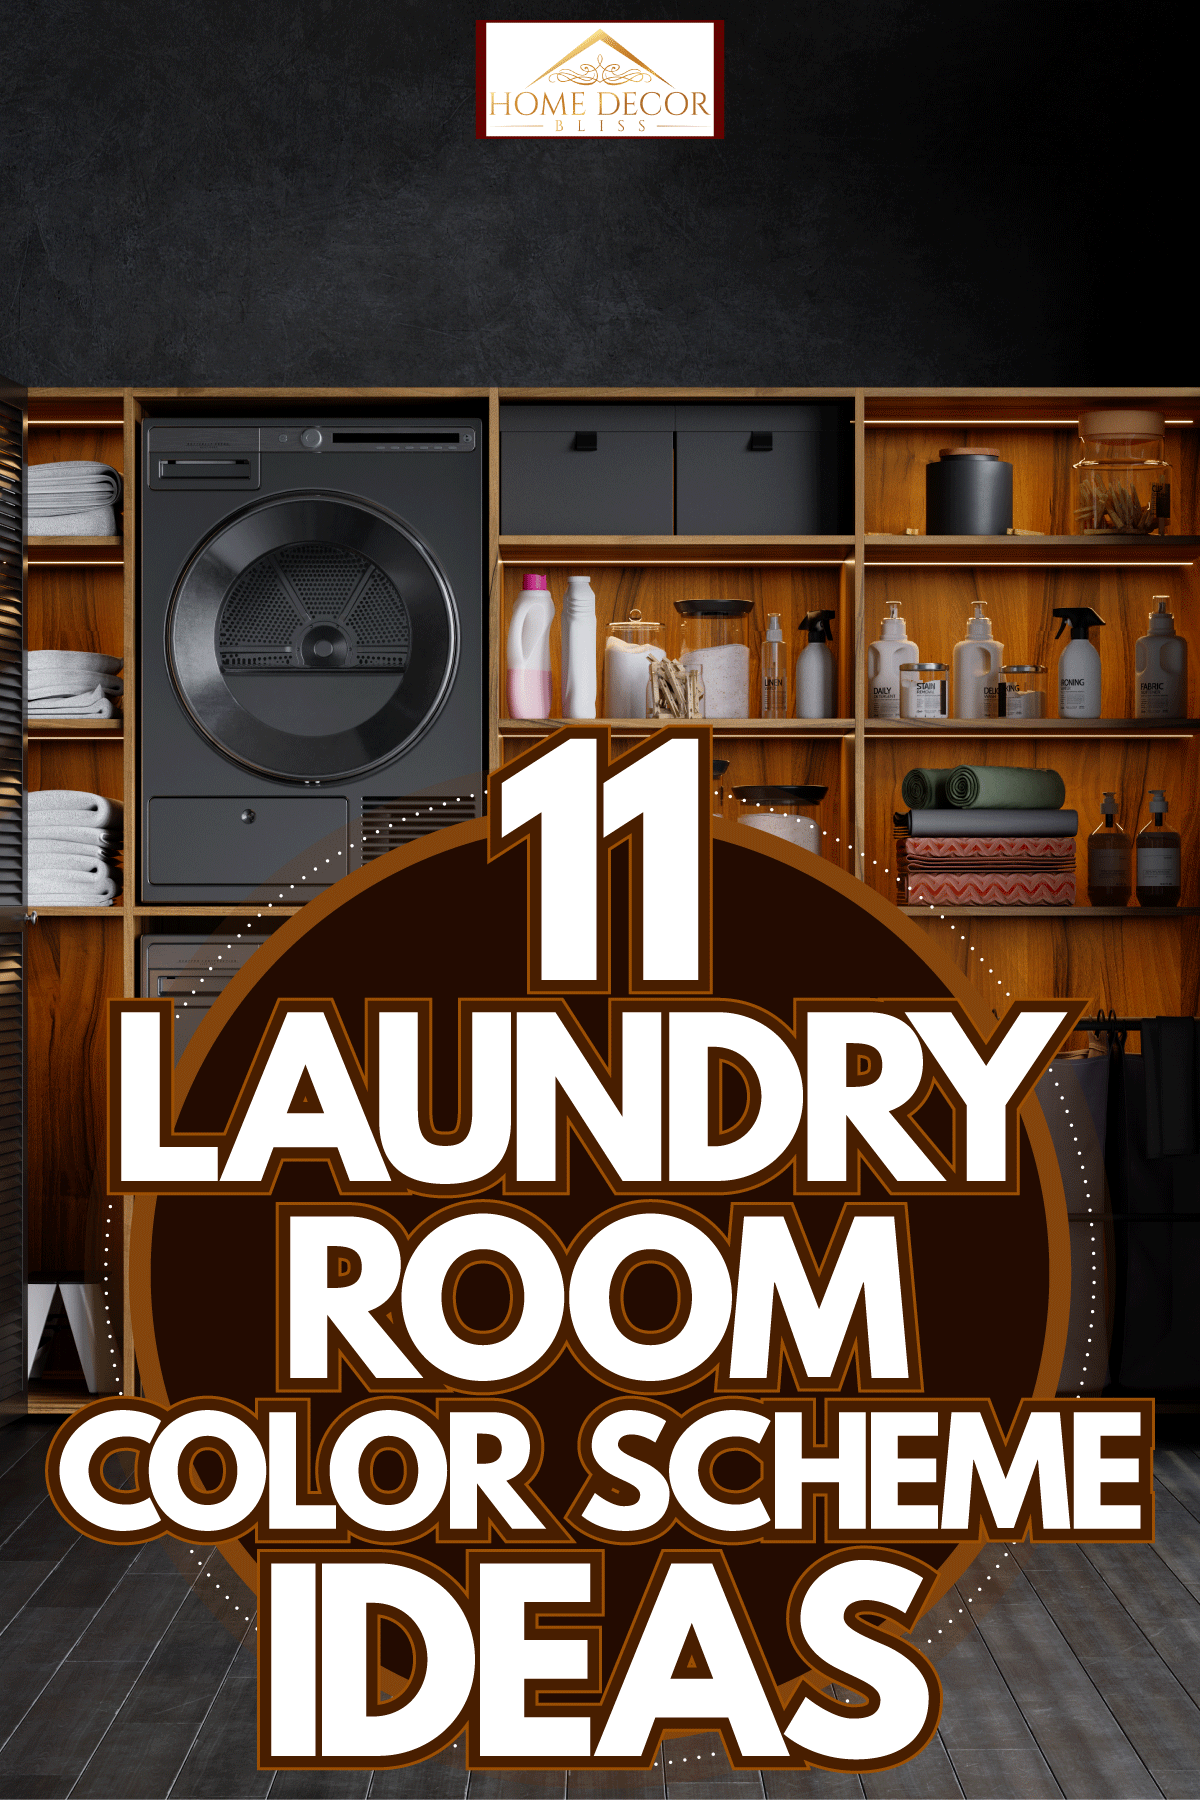 A wooden cabinet inside the laundry room with a black washing machine and dryer, 11 Laundry Room Color Scheme Ideas